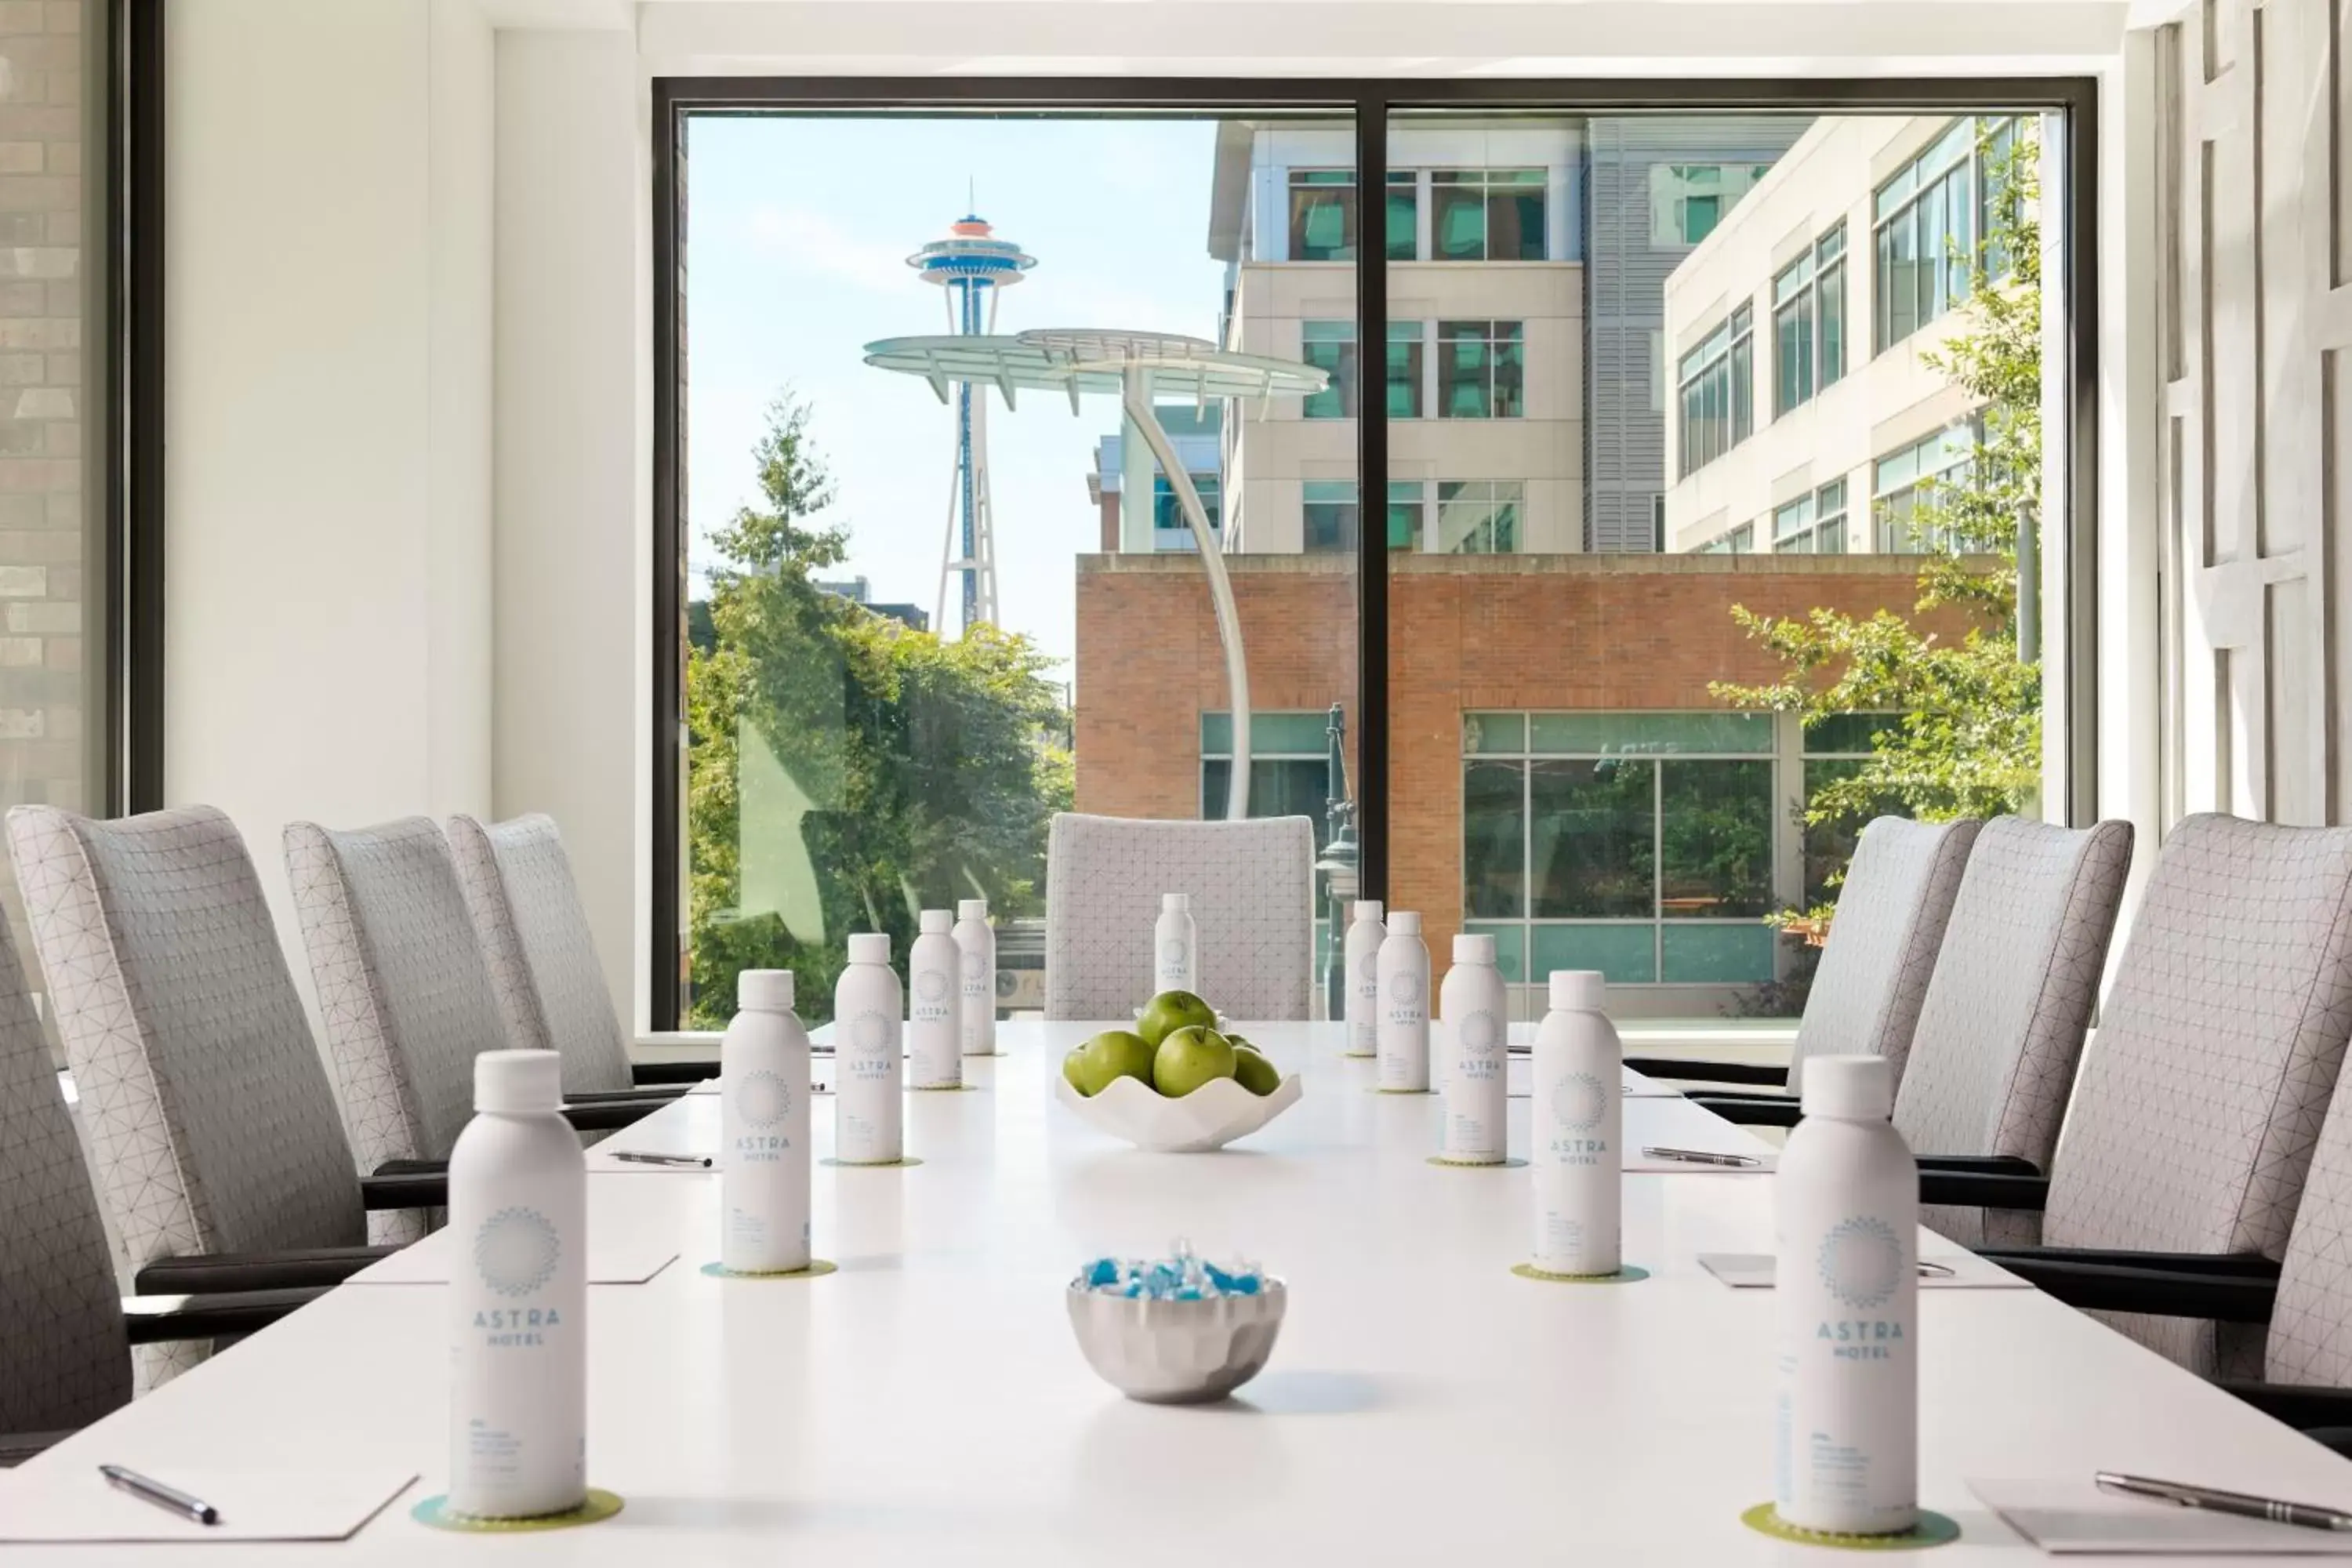 Meeting/conference room in Astra Hotel, Seattle, A Tribute Portfolio Hotel by Marriott